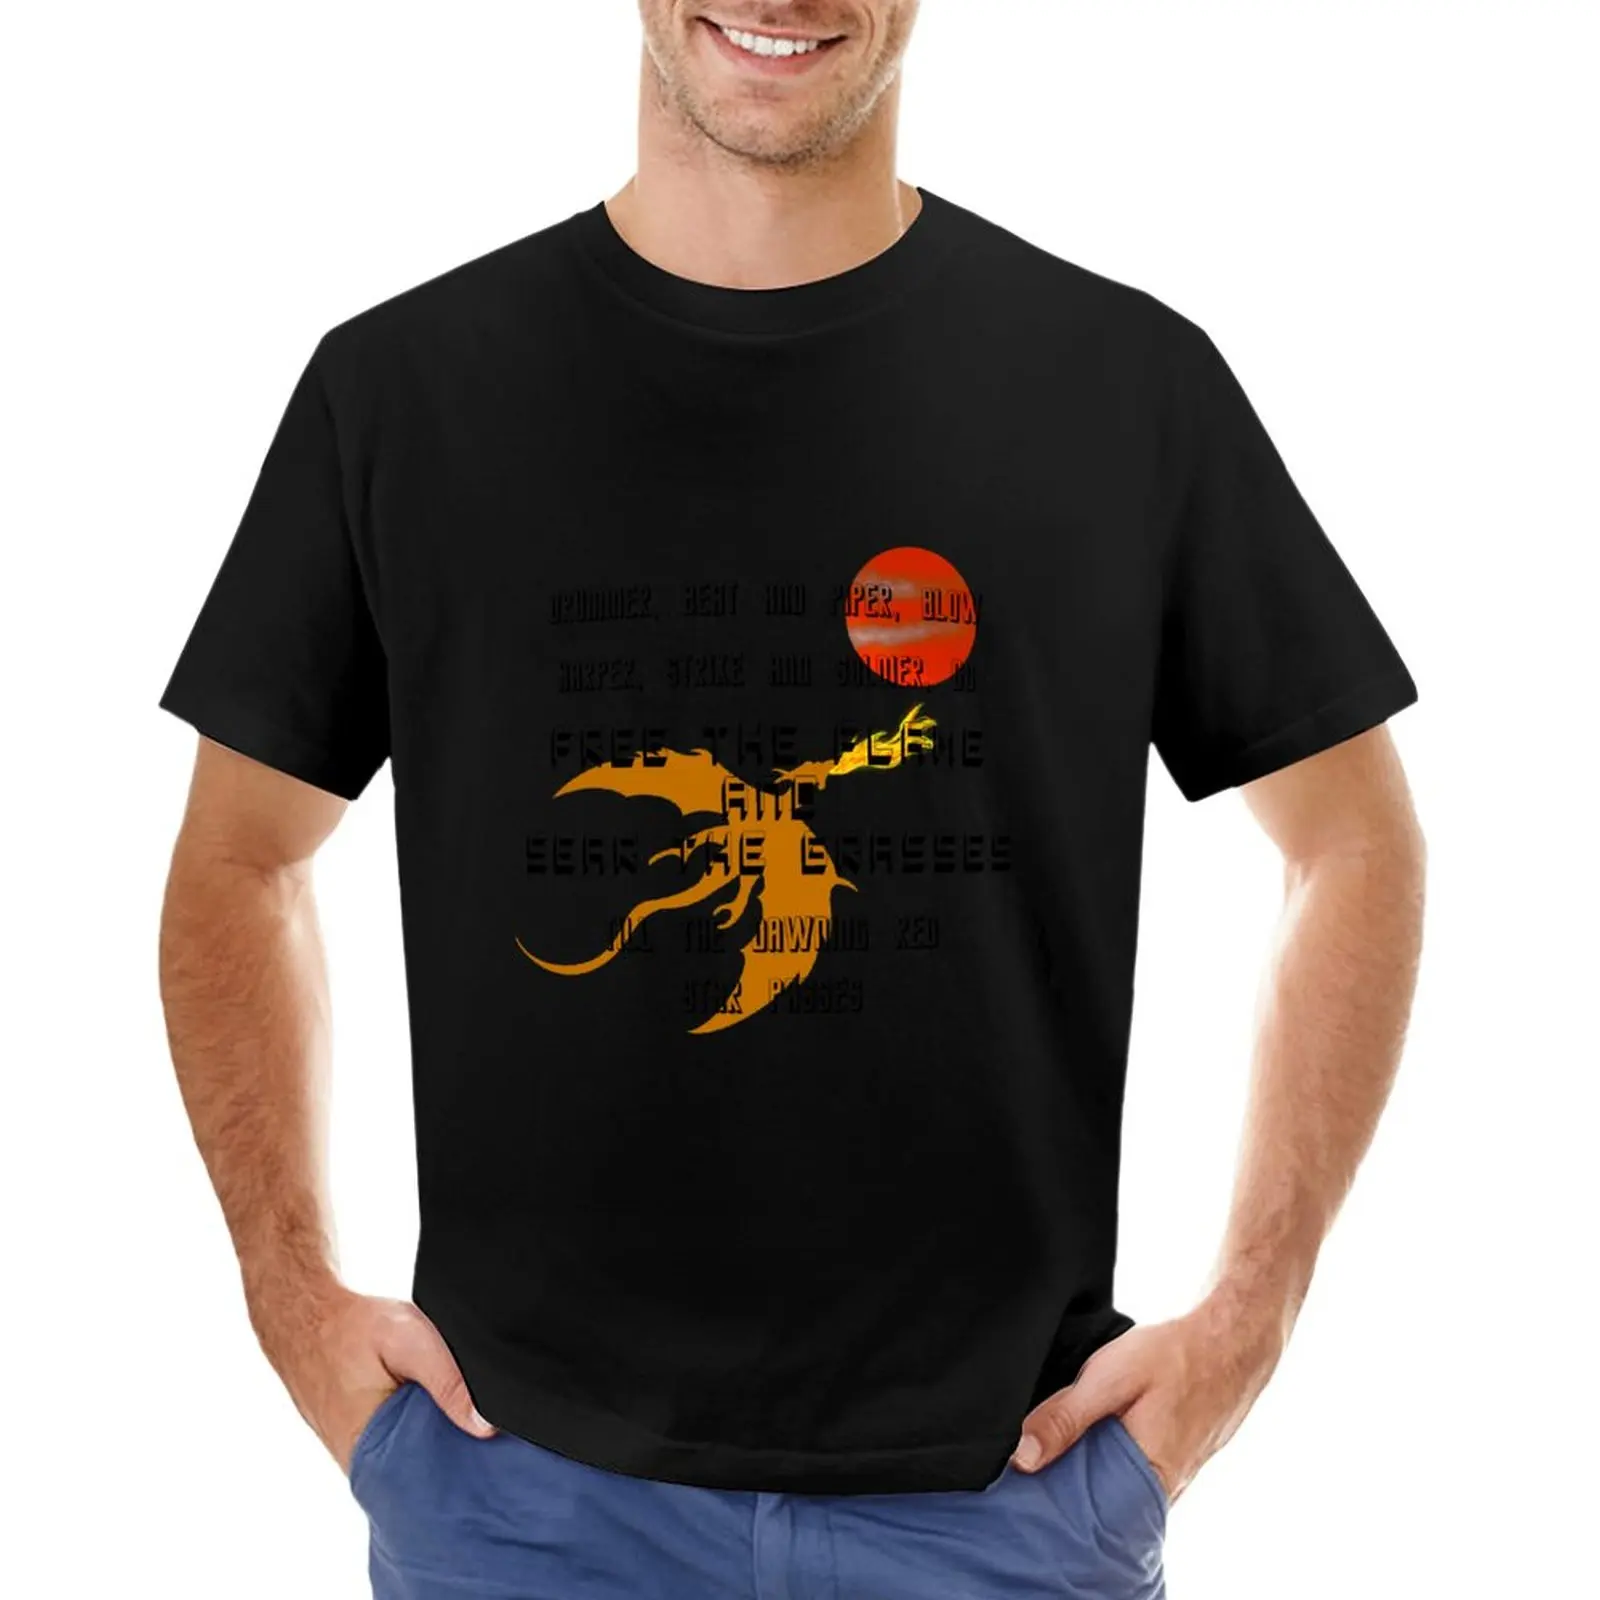 

Drummer, Beat and Piper Blow Dragonriders of Pern Quote. T-Shirt shirts graphic tees custom t shirts design your own men clothes